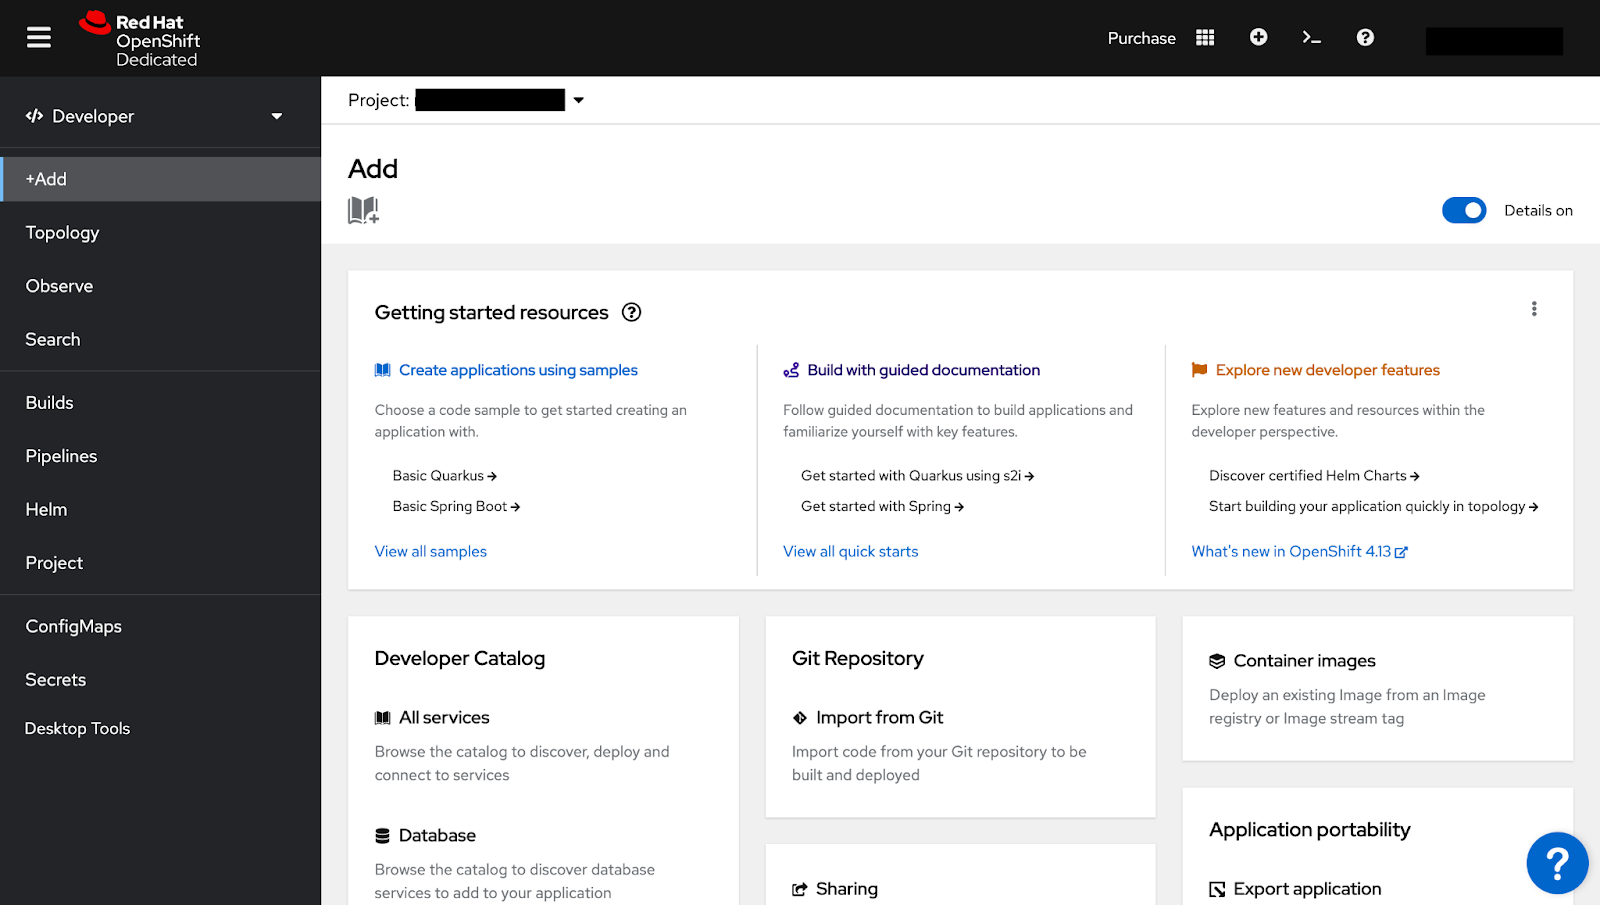 Project's Add page with getting started resources, developer catalog, Git repository, sharing, container images, and application portability.